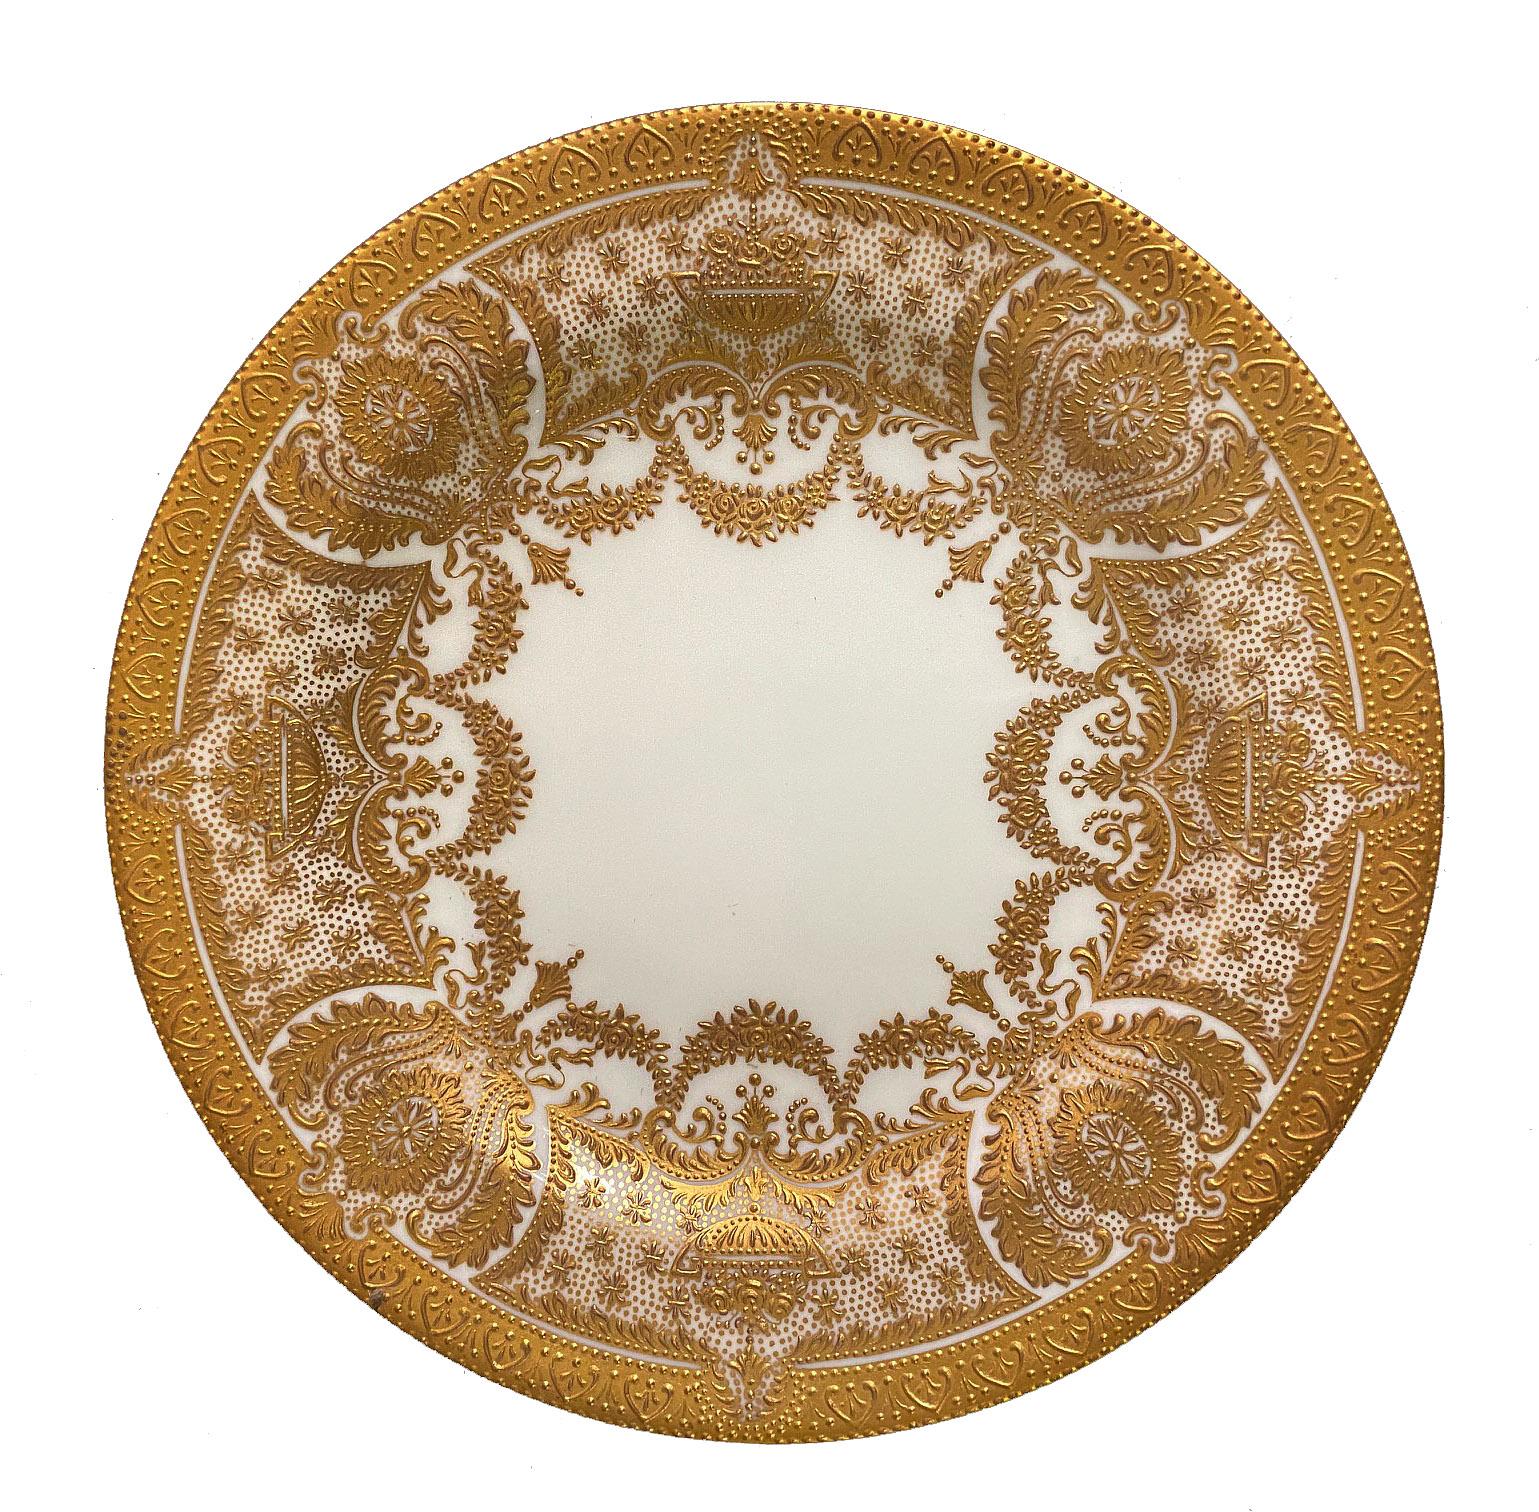 A very fine set of fourteen early 20th century English Cauldon bread plates.

Finely decorated with raised gold.

Stamped Cauldon China England on the back of the plates.